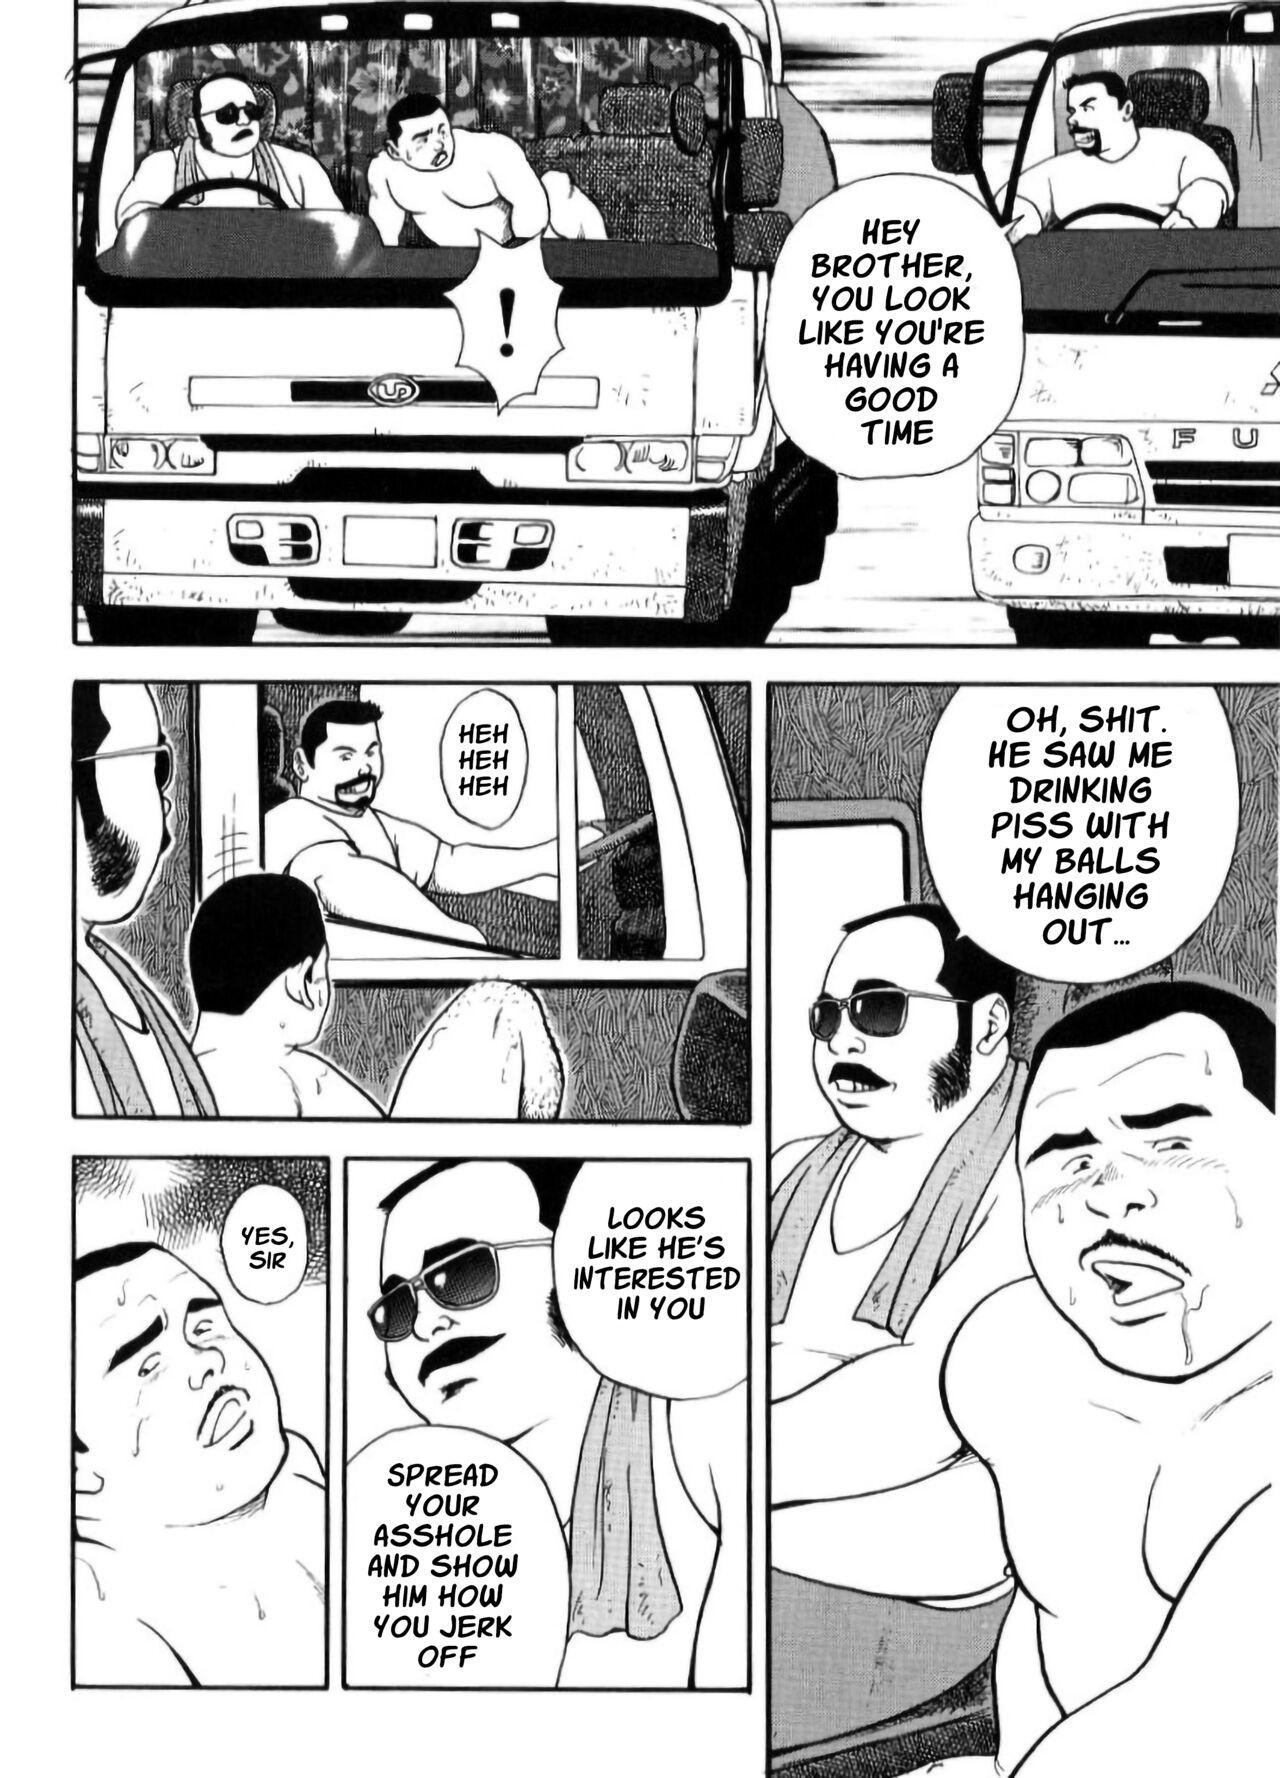 Shoplifter I Like You - Man in the Passenger Seat Sentones - Page 4